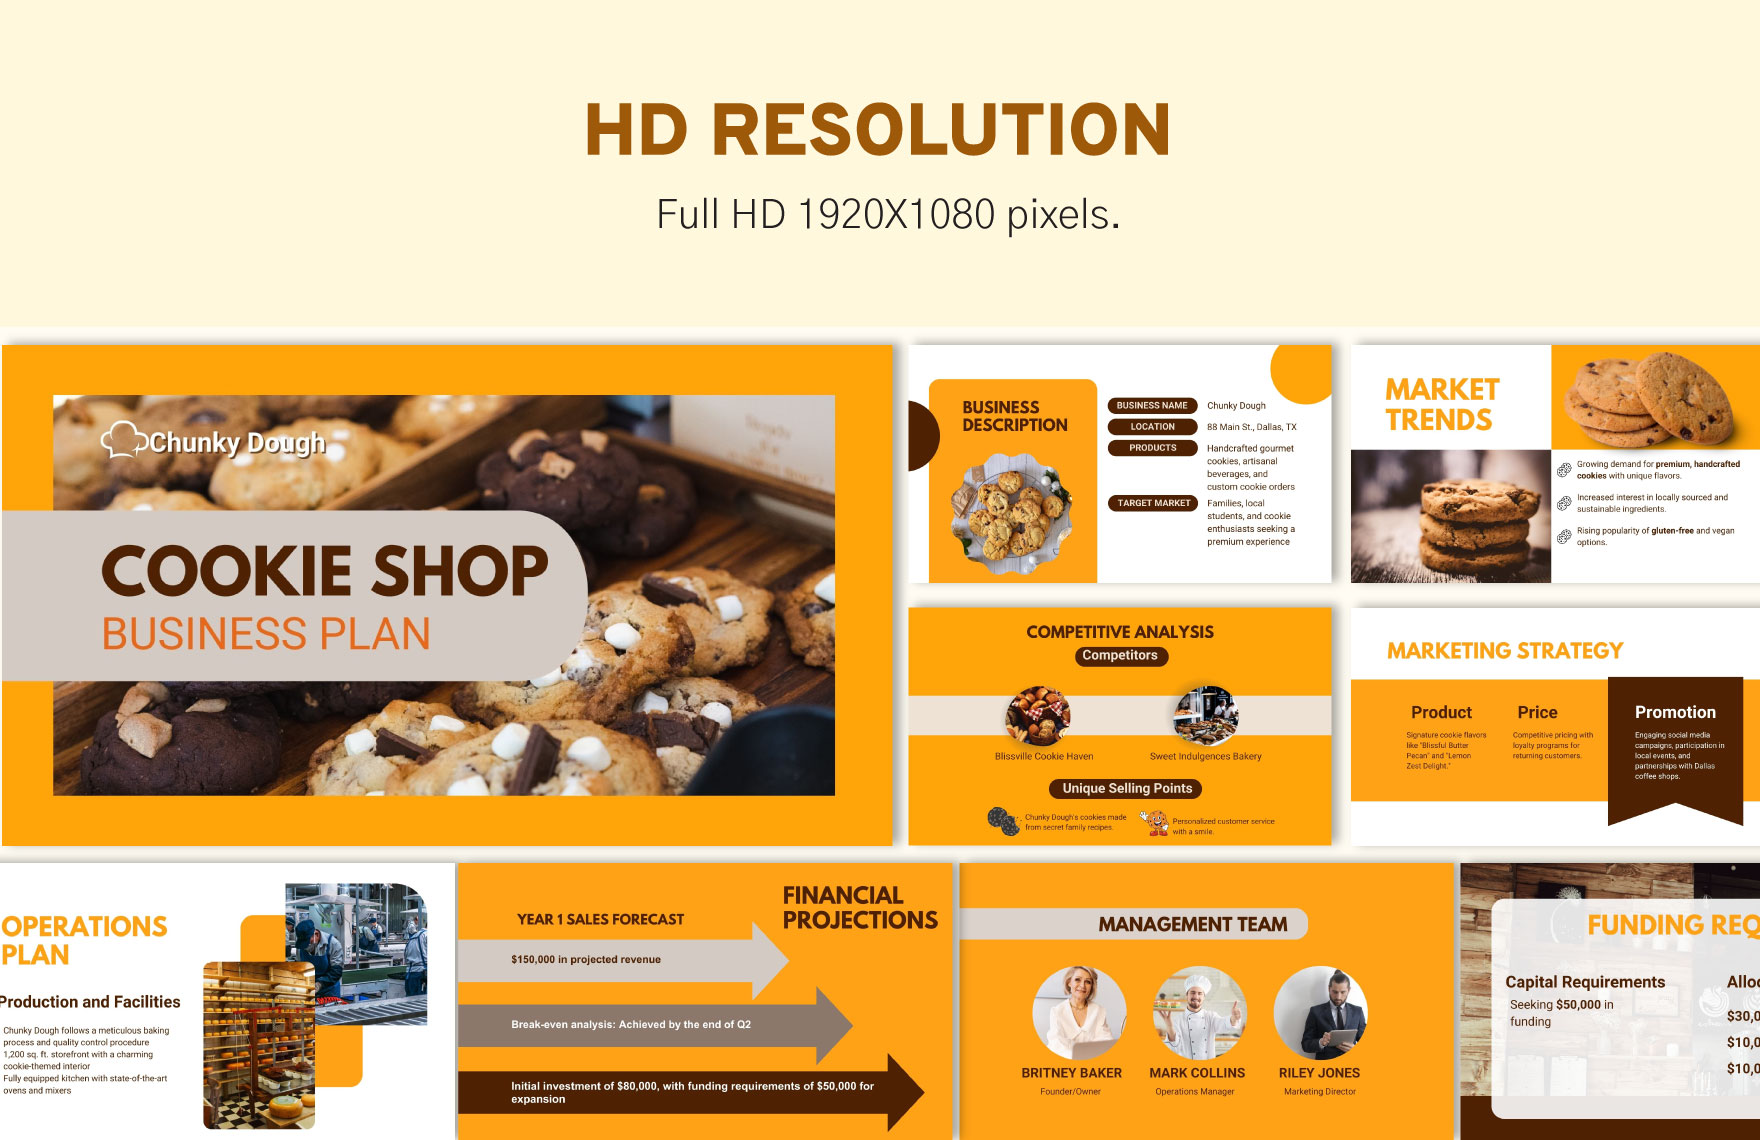 Cookie Shop Business Plan Template